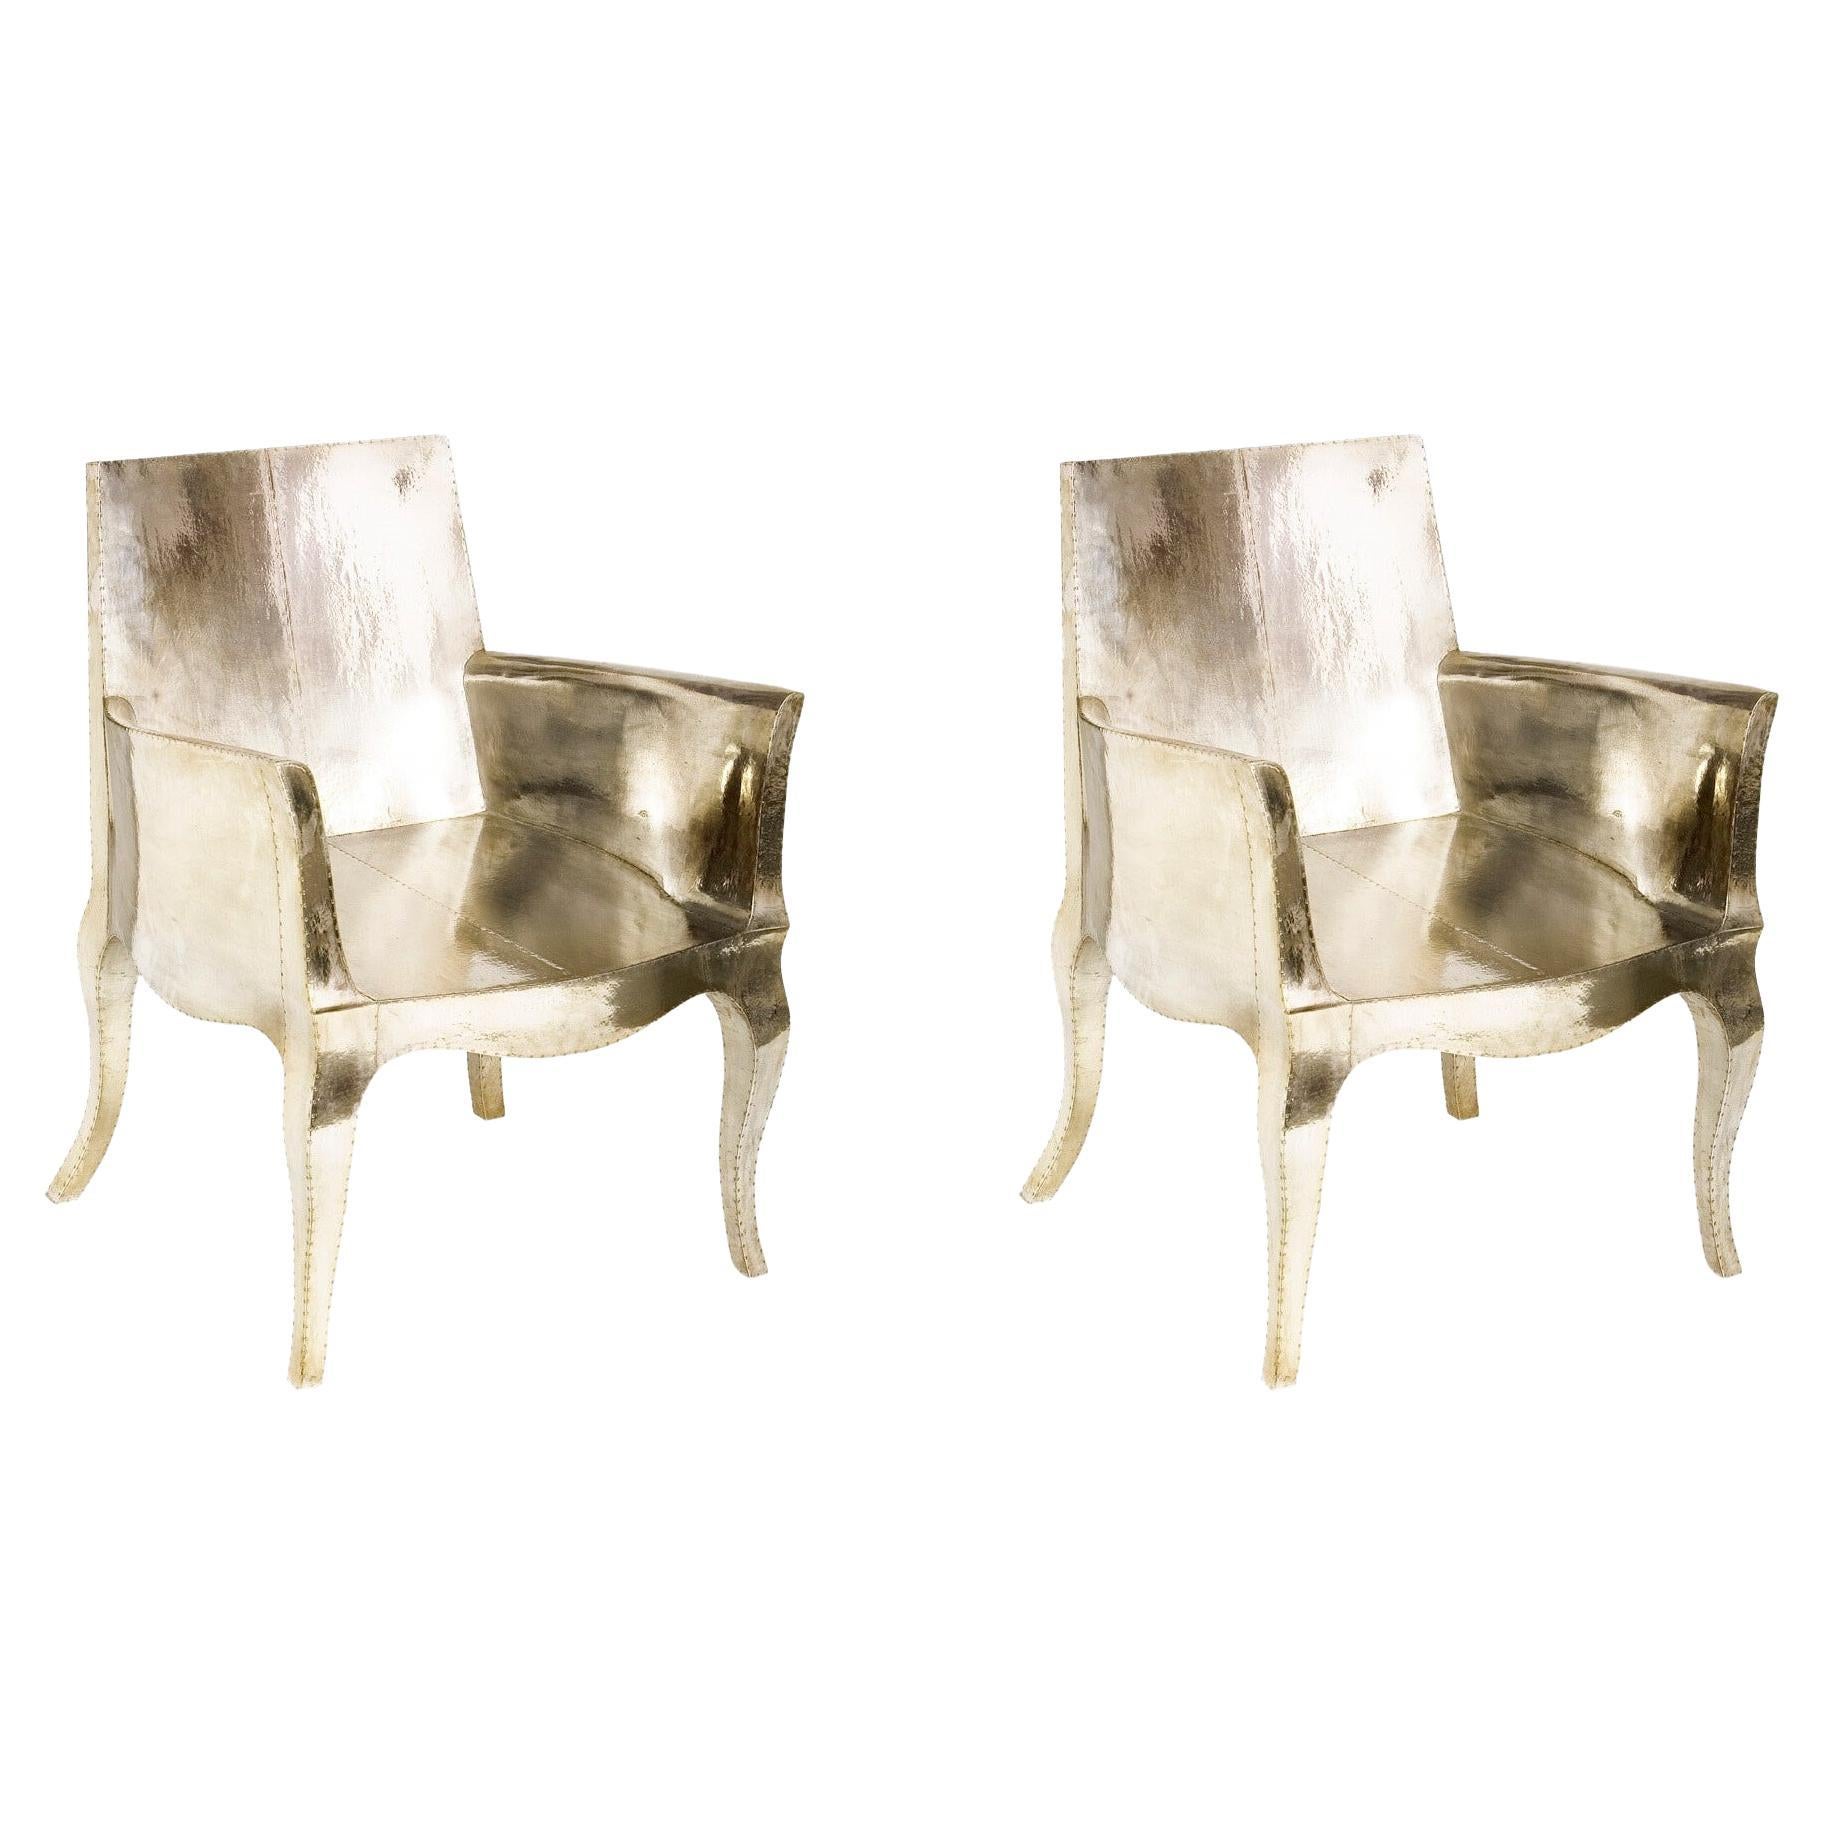 Art Deco Desk Chair Pair Designed by Paul Mathieu for Stephanie Odegard For Sale